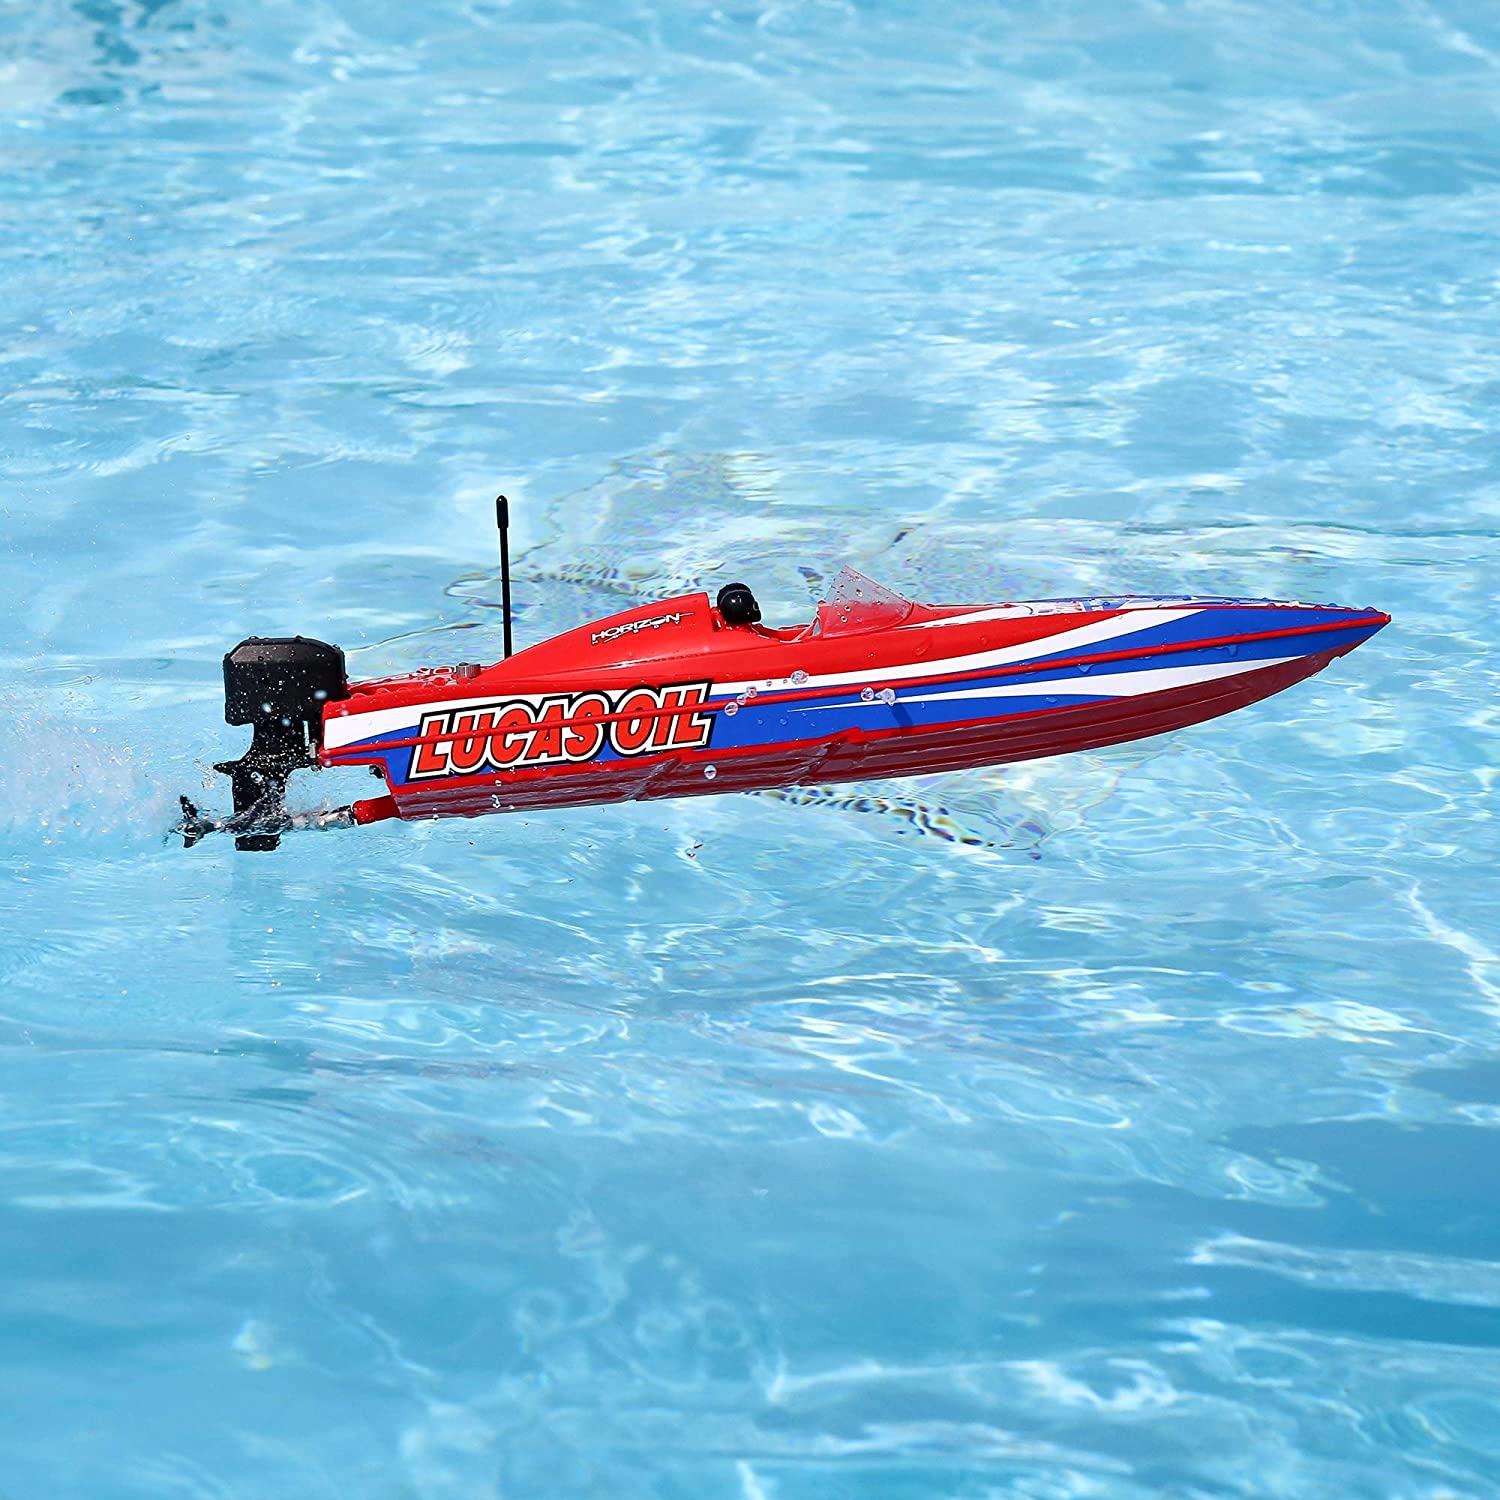 RC Jet Boats Are Lake and PoolFriendly for YearRound Fun alt_driver